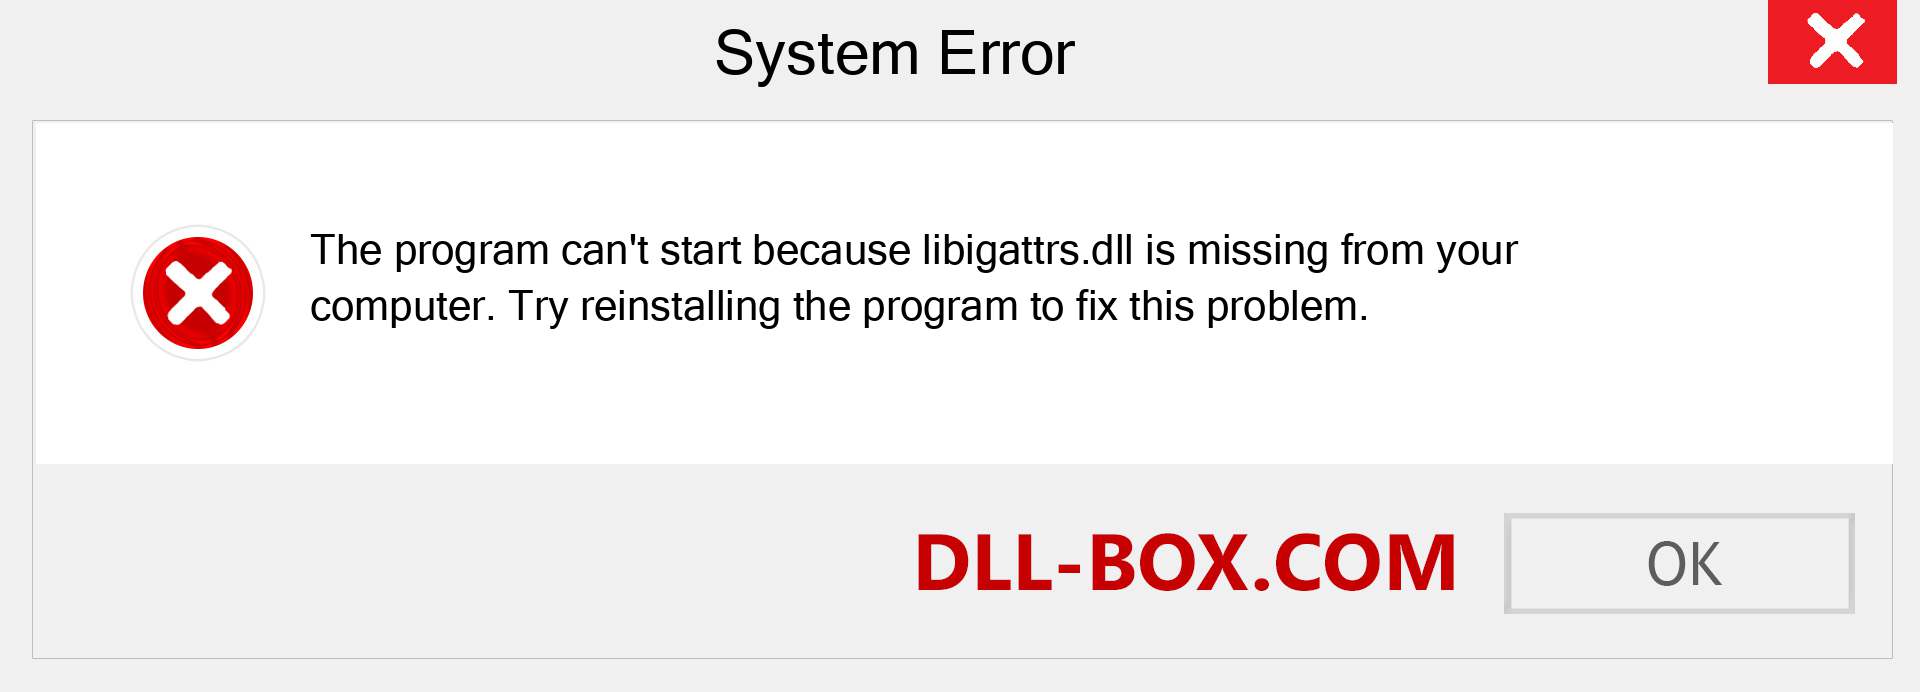  libigattrs.dll file is missing?. Download for Windows 7, 8, 10 - Fix  libigattrs dll Missing Error on Windows, photos, images